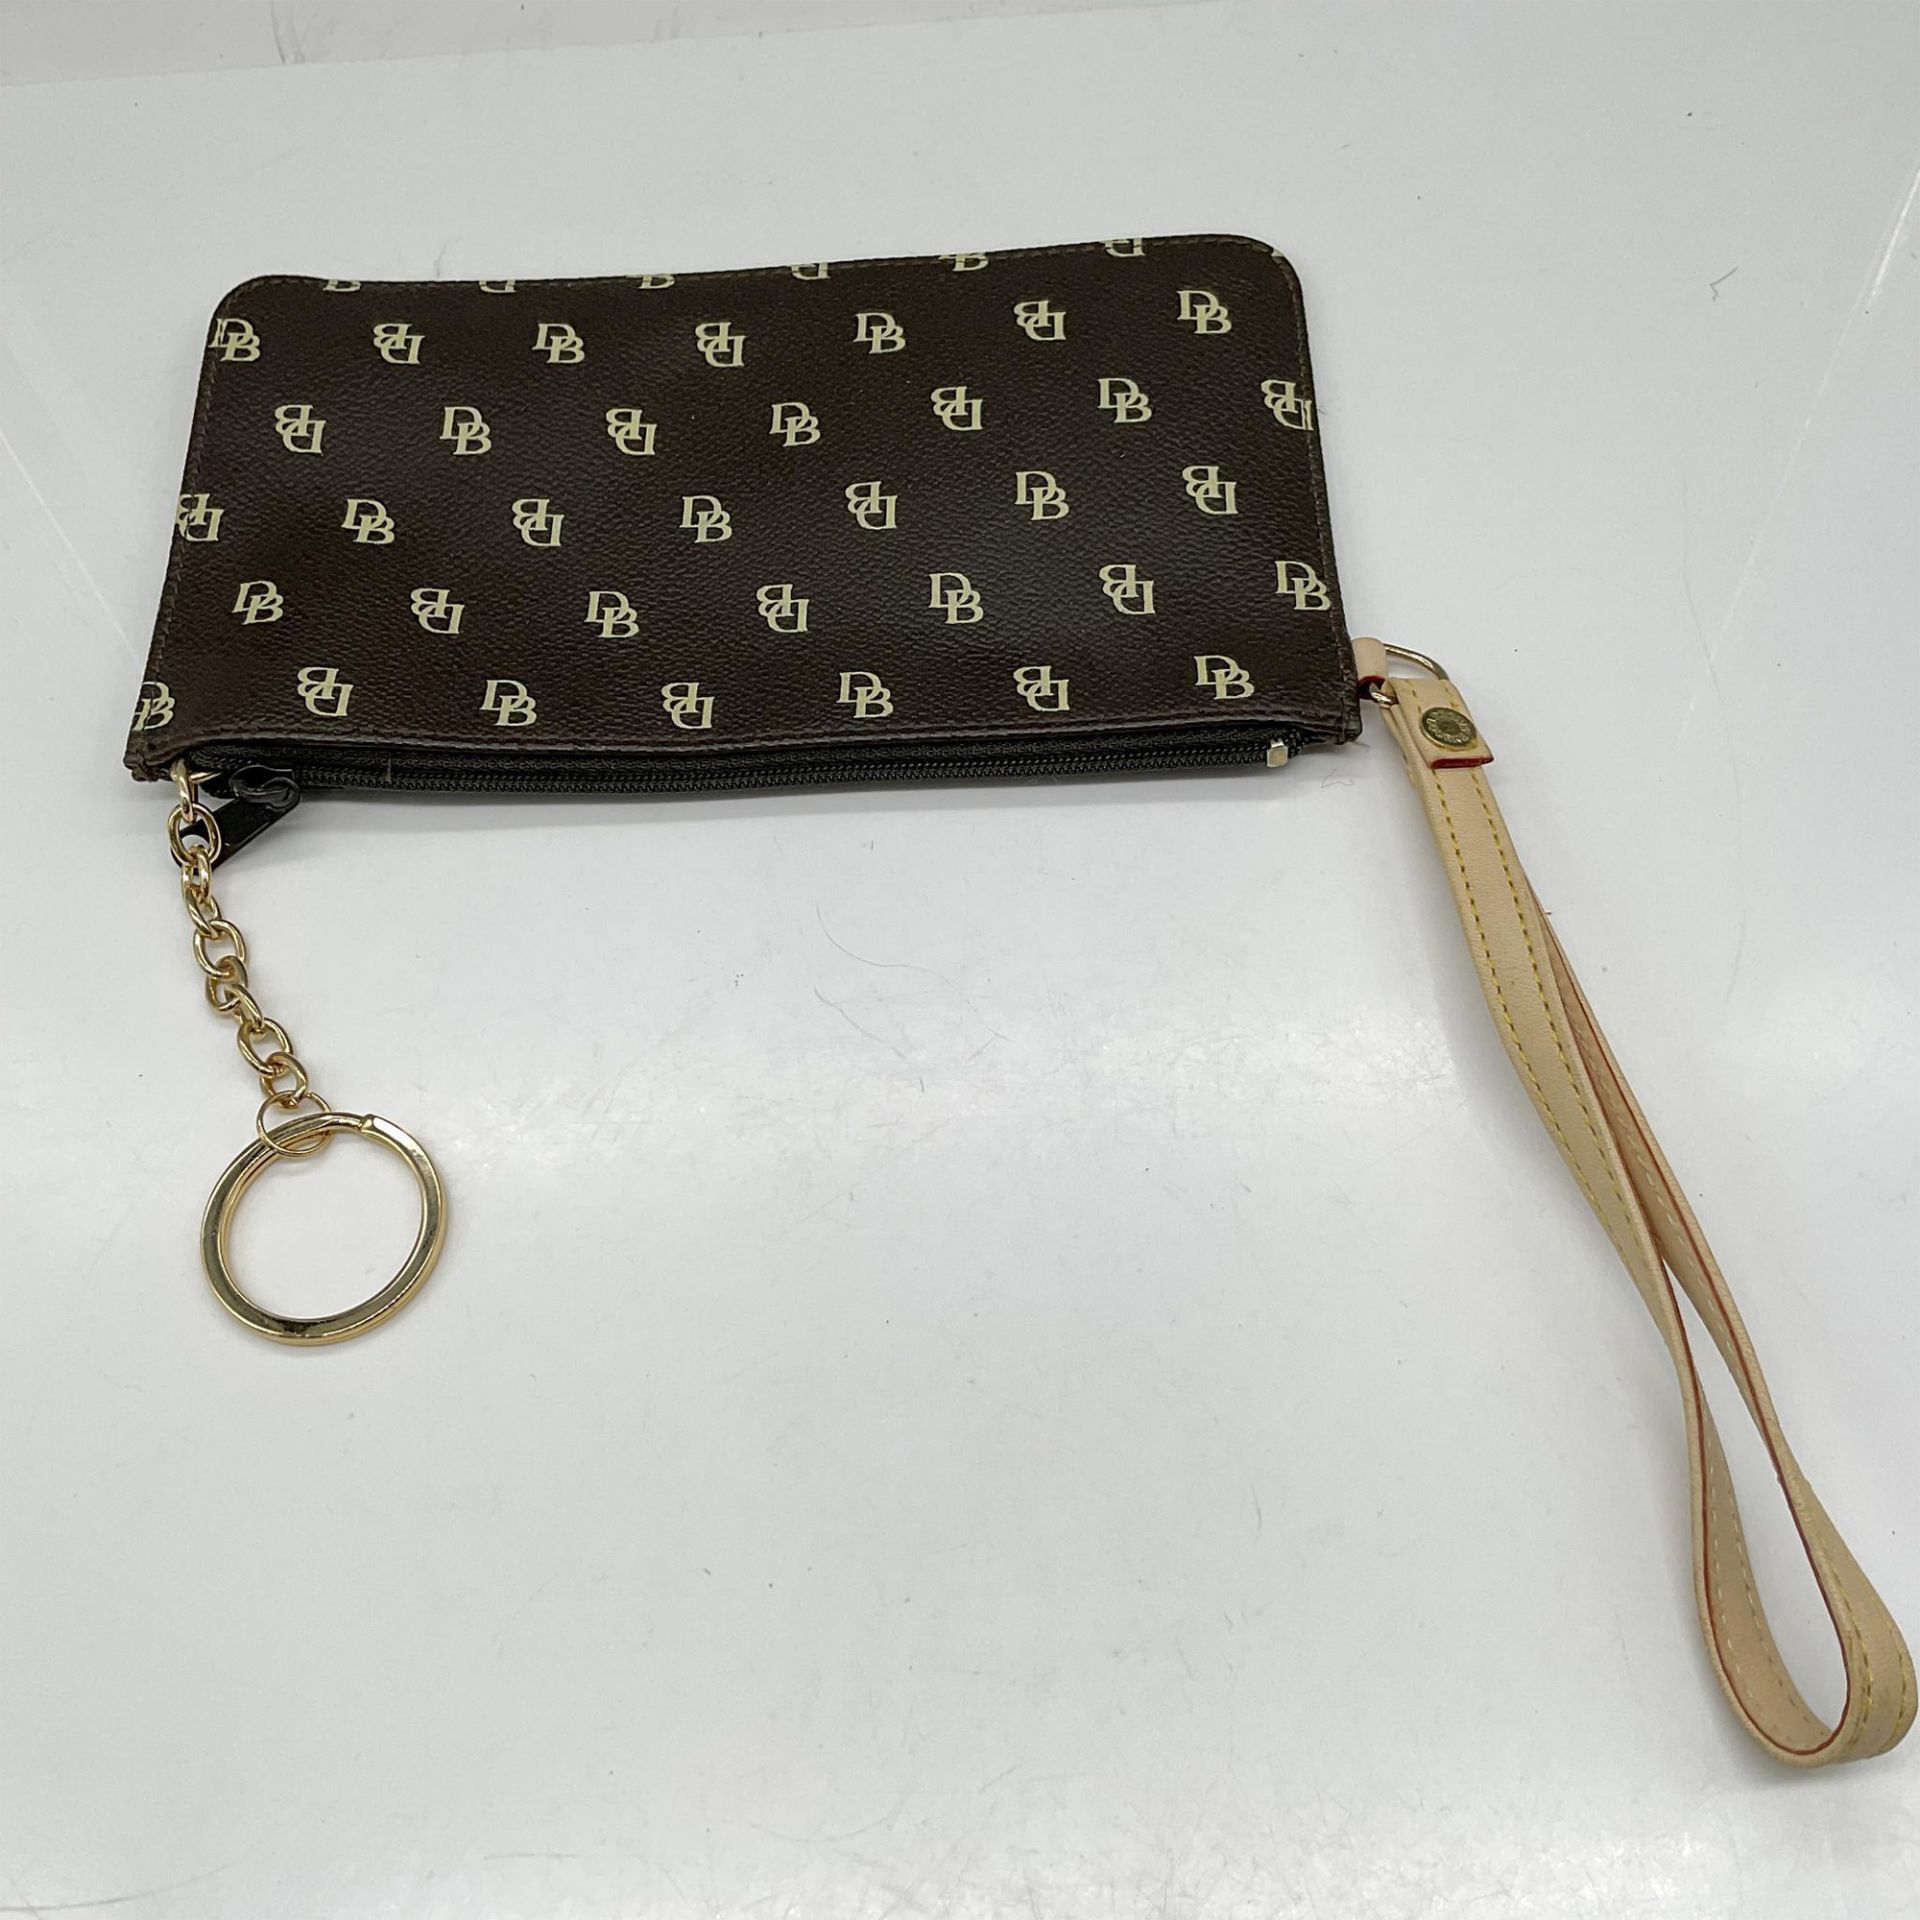 2pc Dooney & Bourke Tote + Coin Purse - Image 4 of 4